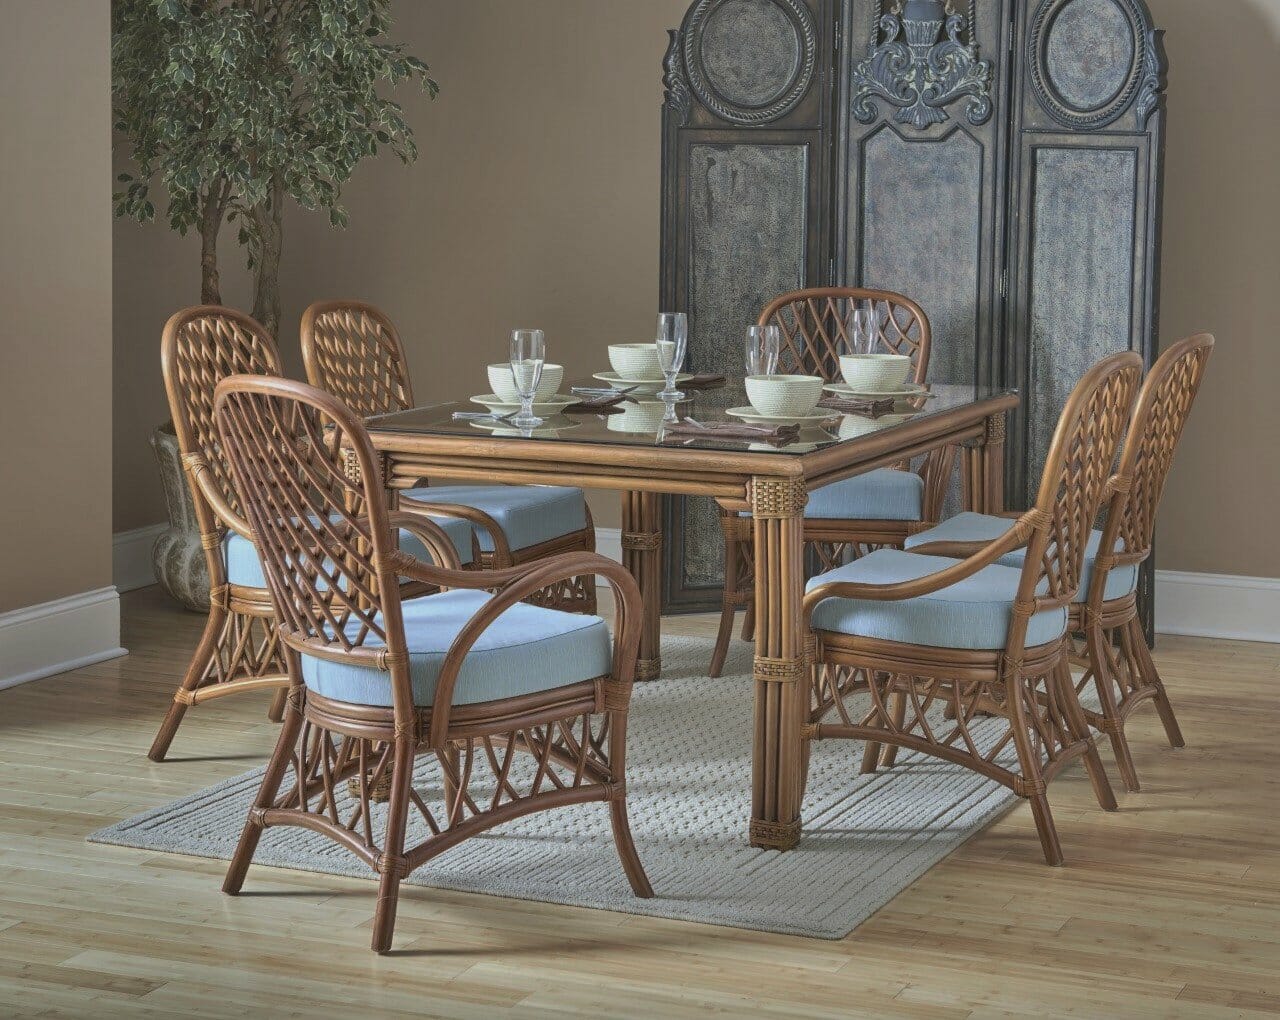 Bamboo And Rattan Dining Room Chair Upholstered